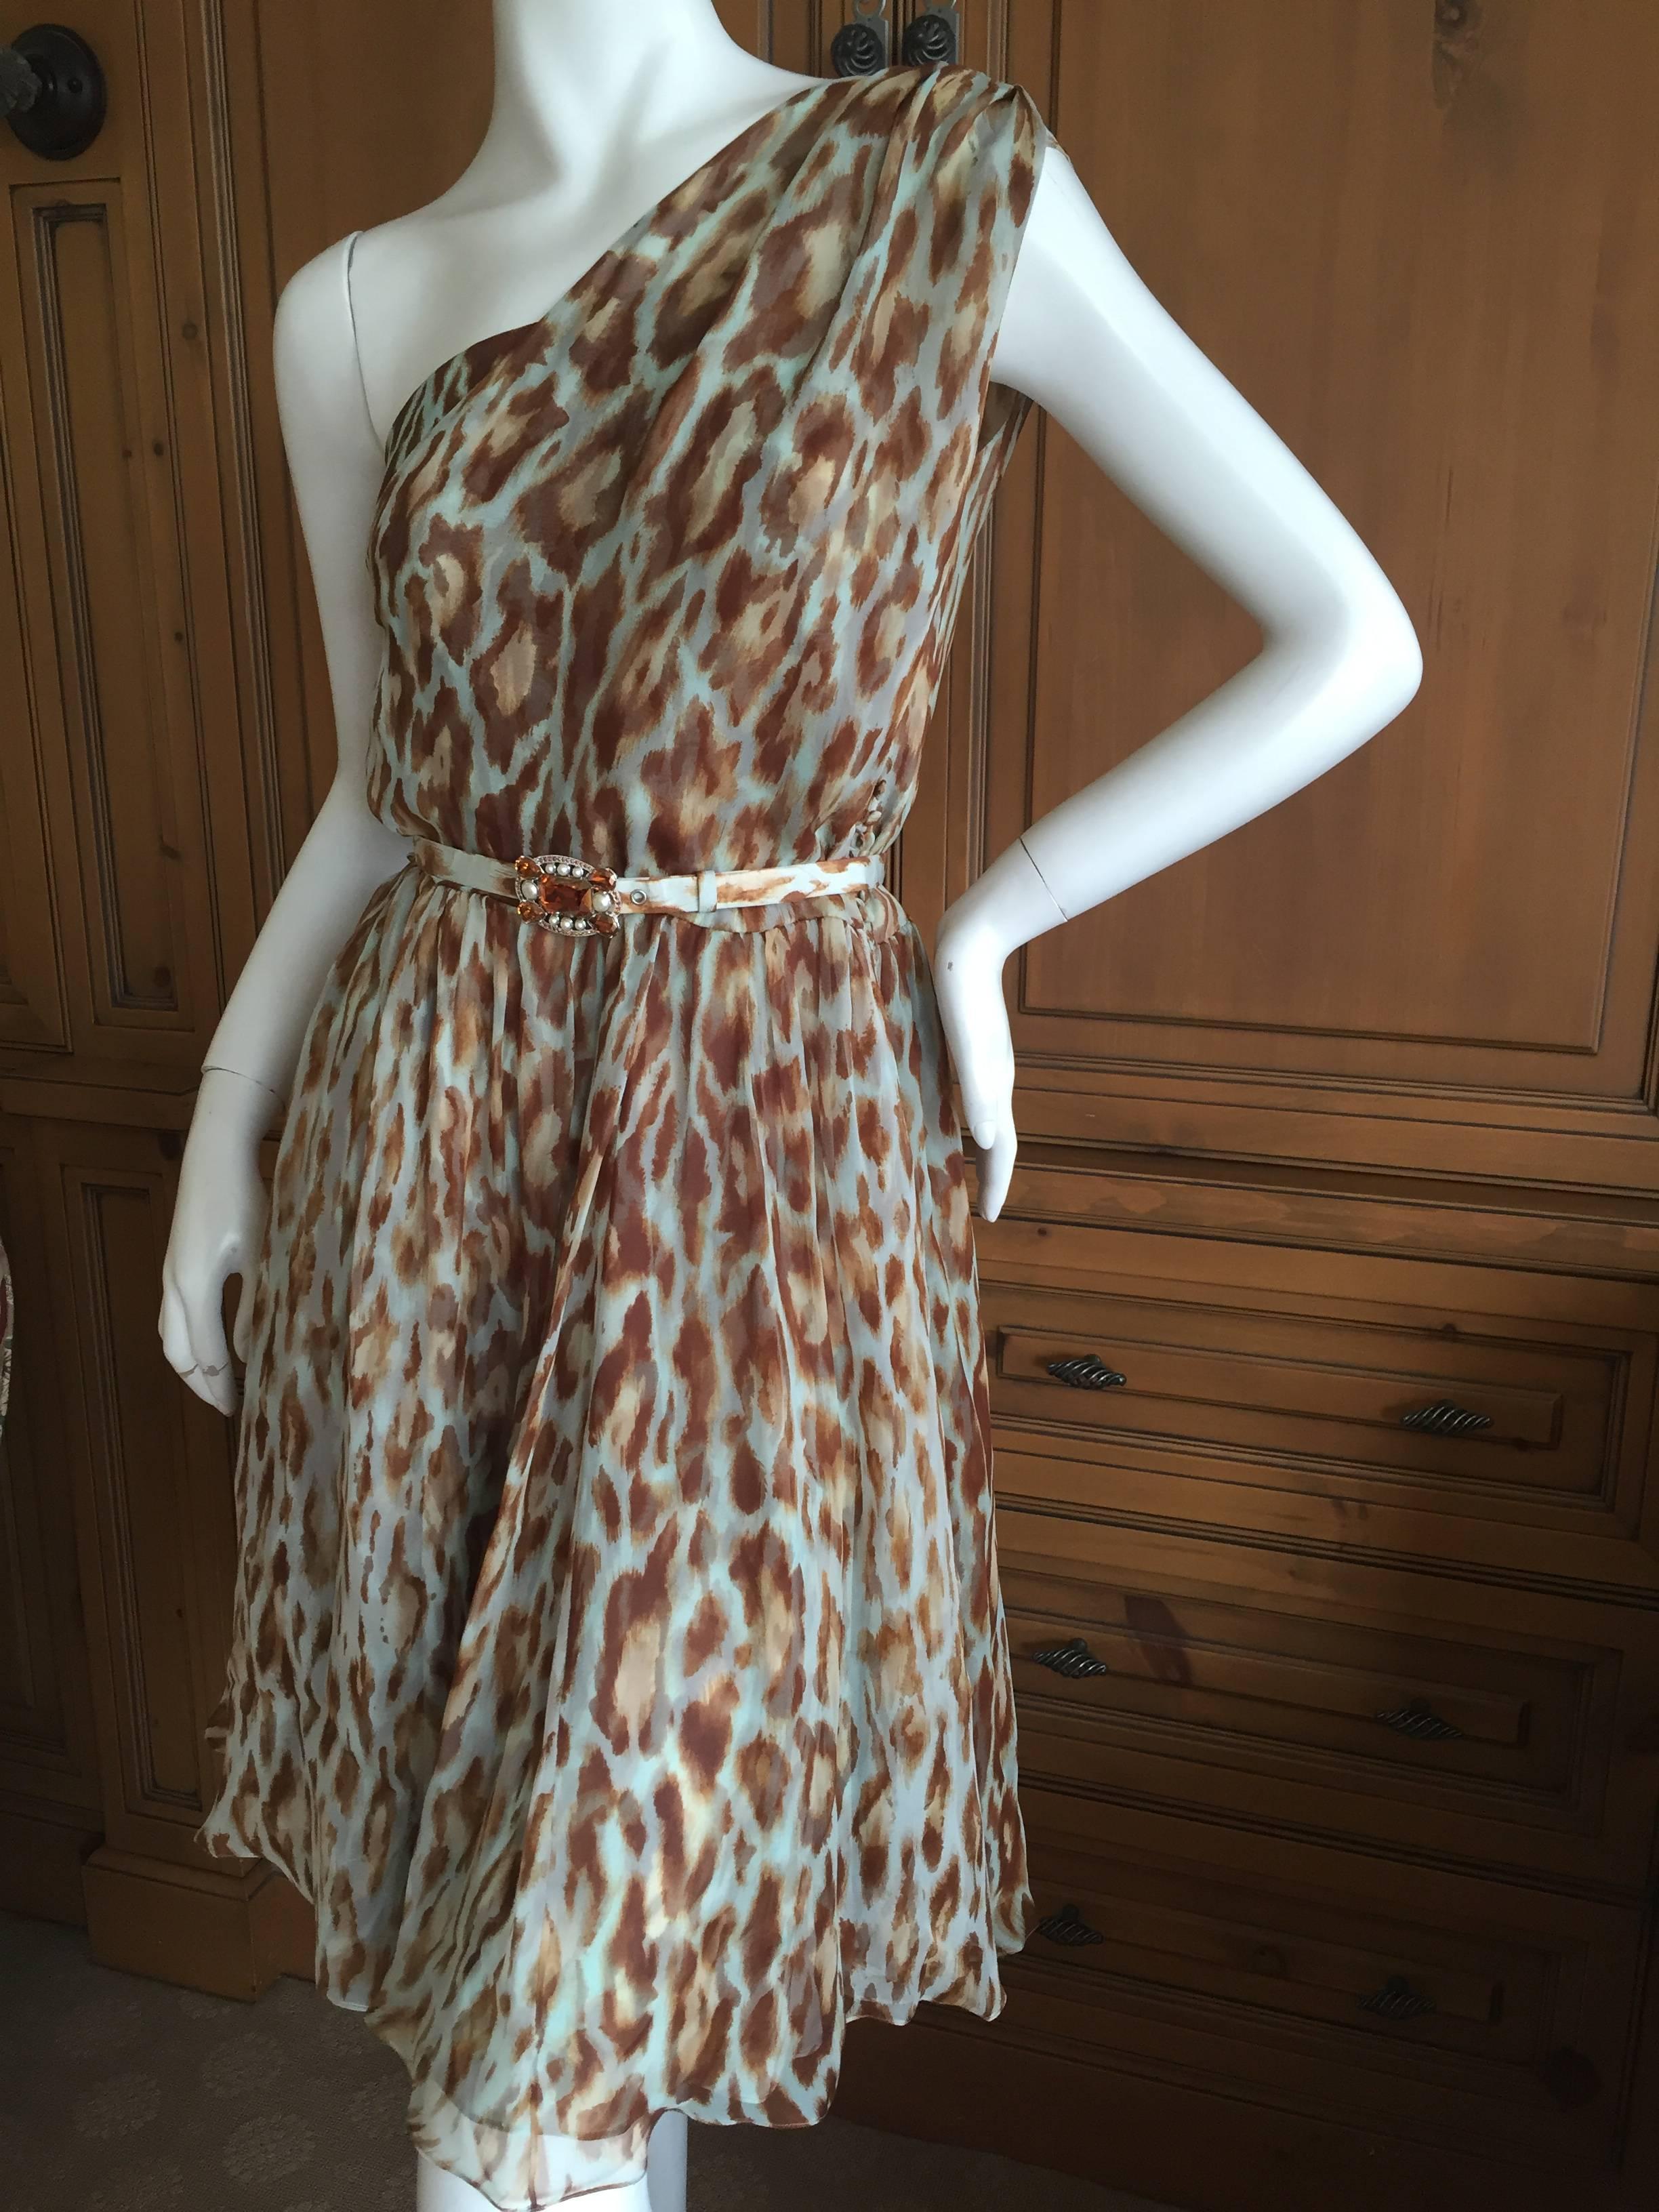 Beautiful leopard print silk one shoulder dress by Galliano for Christian Dior.
With jeweled belt.
Size 36
Bust 36"
Waist 26"
His 42'
Length 40"
Excellent condition